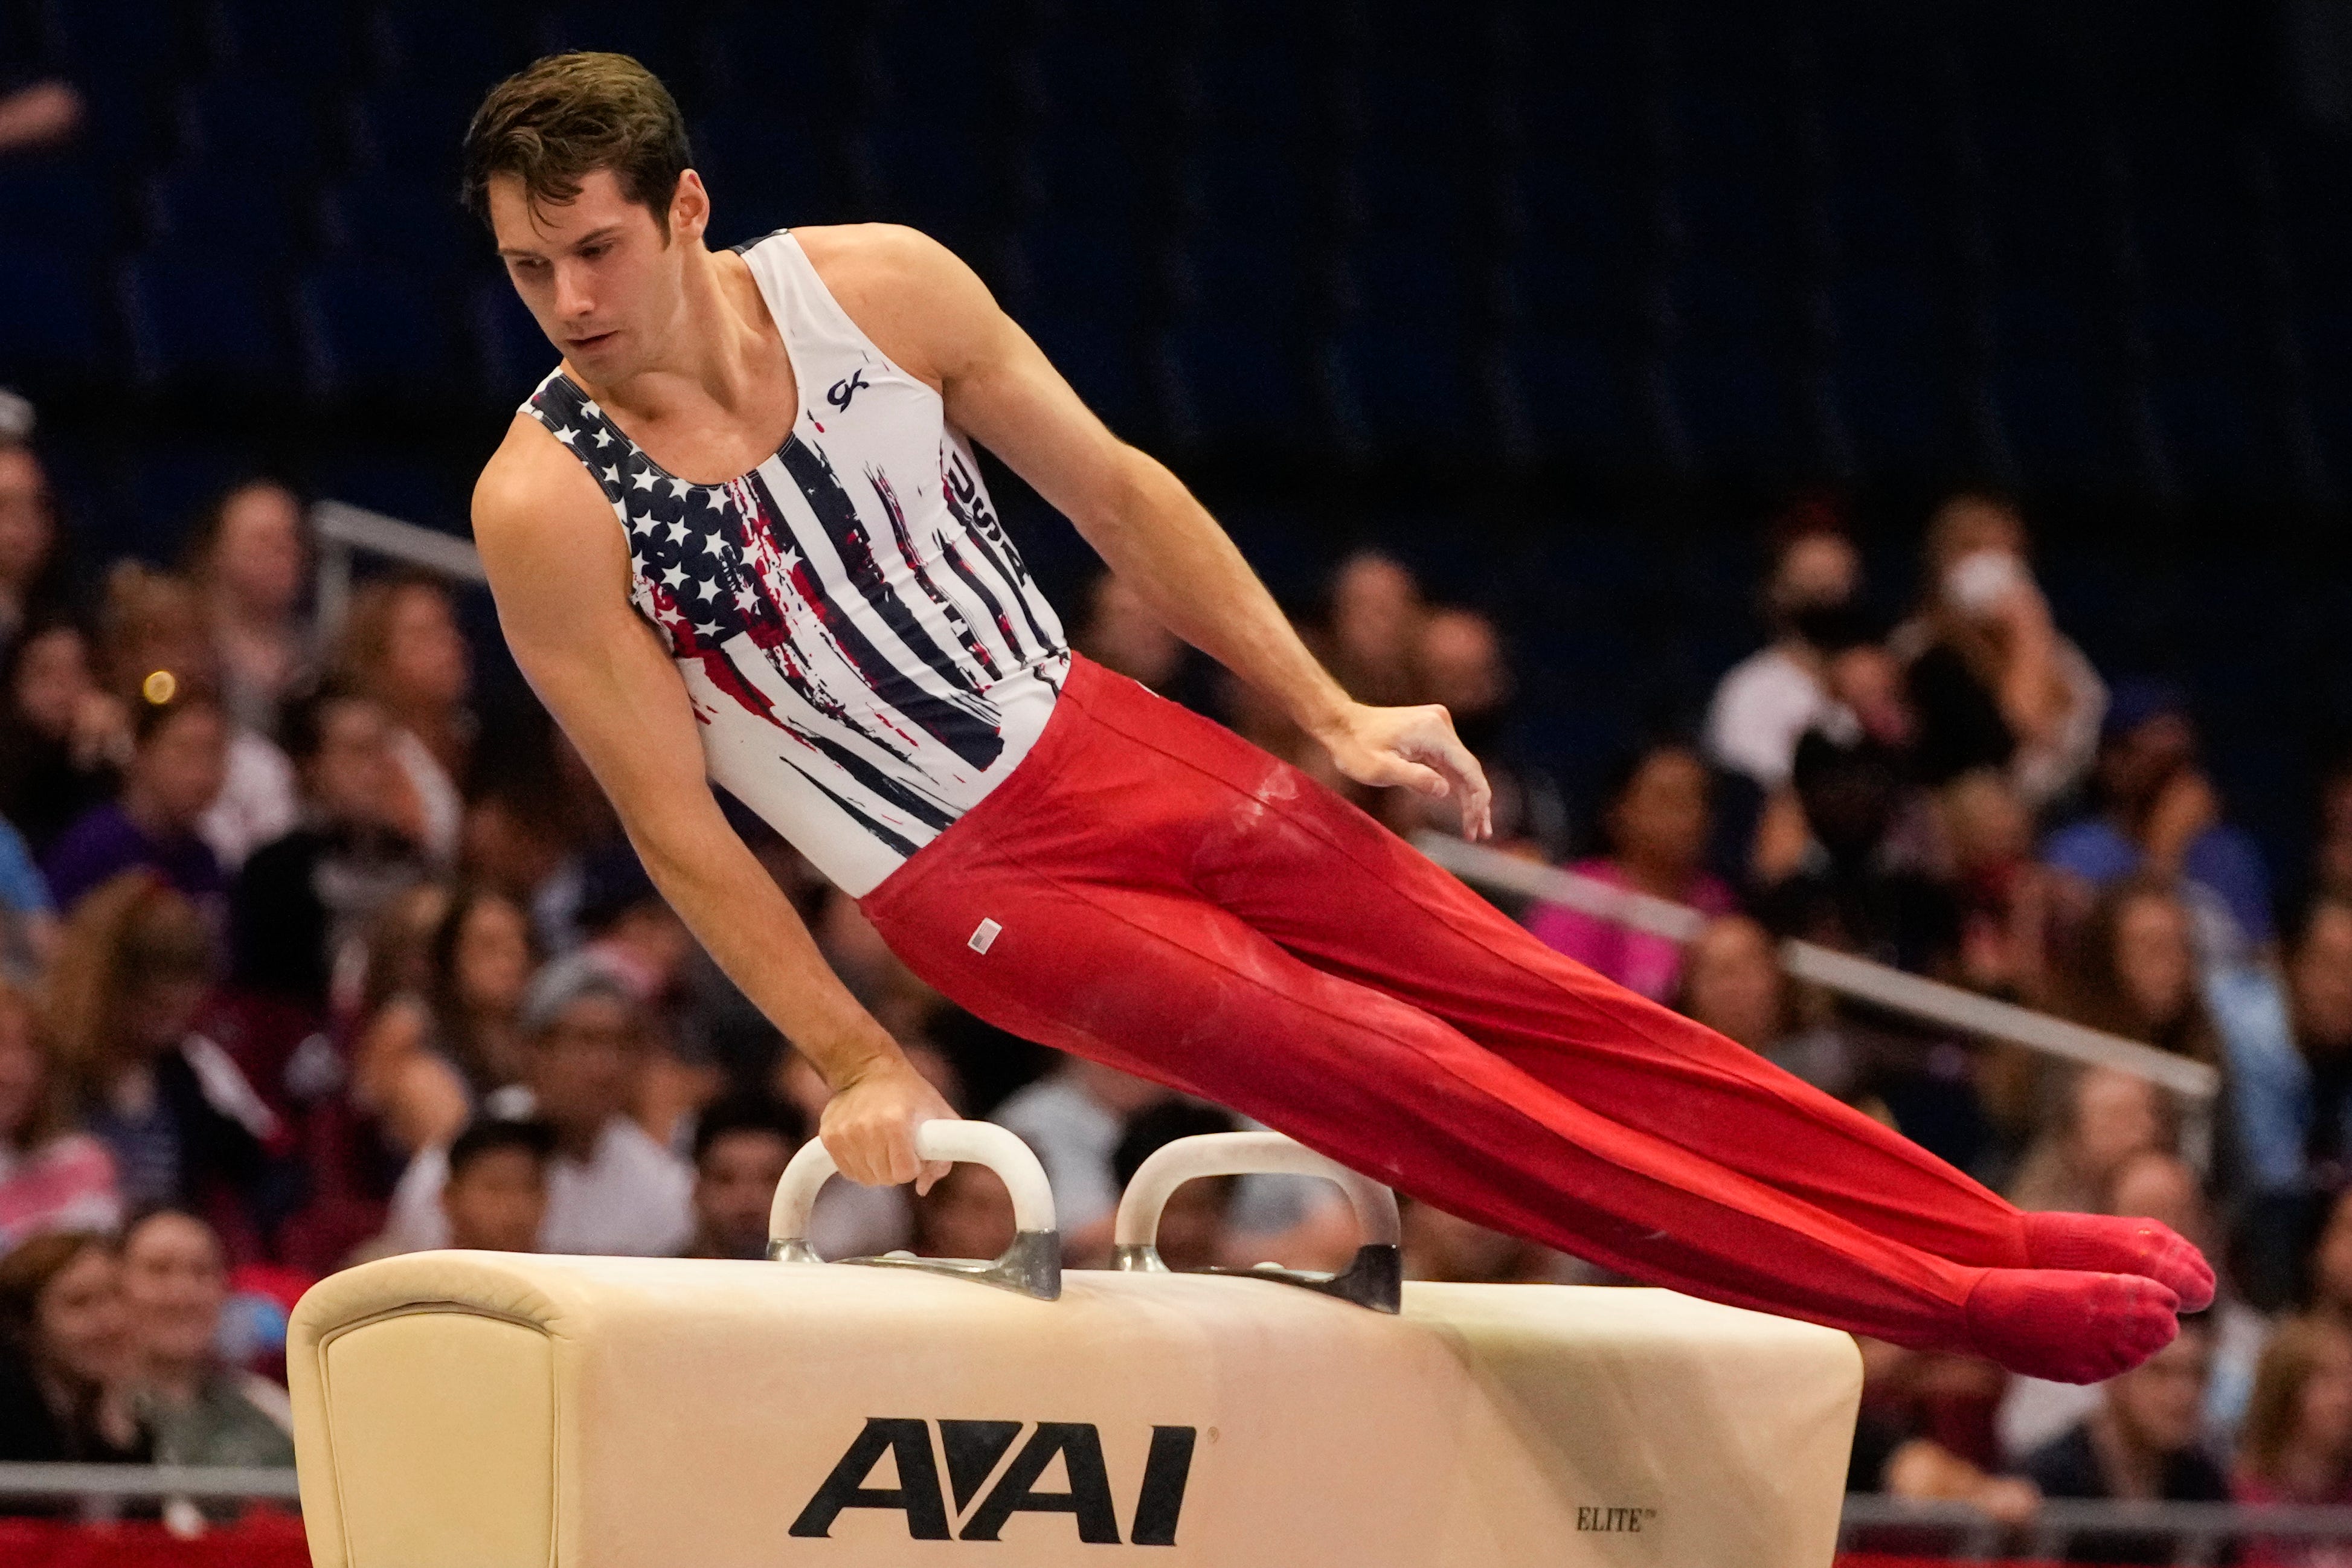 Olympic trials: Alec Yoder secures his place in Tokyo